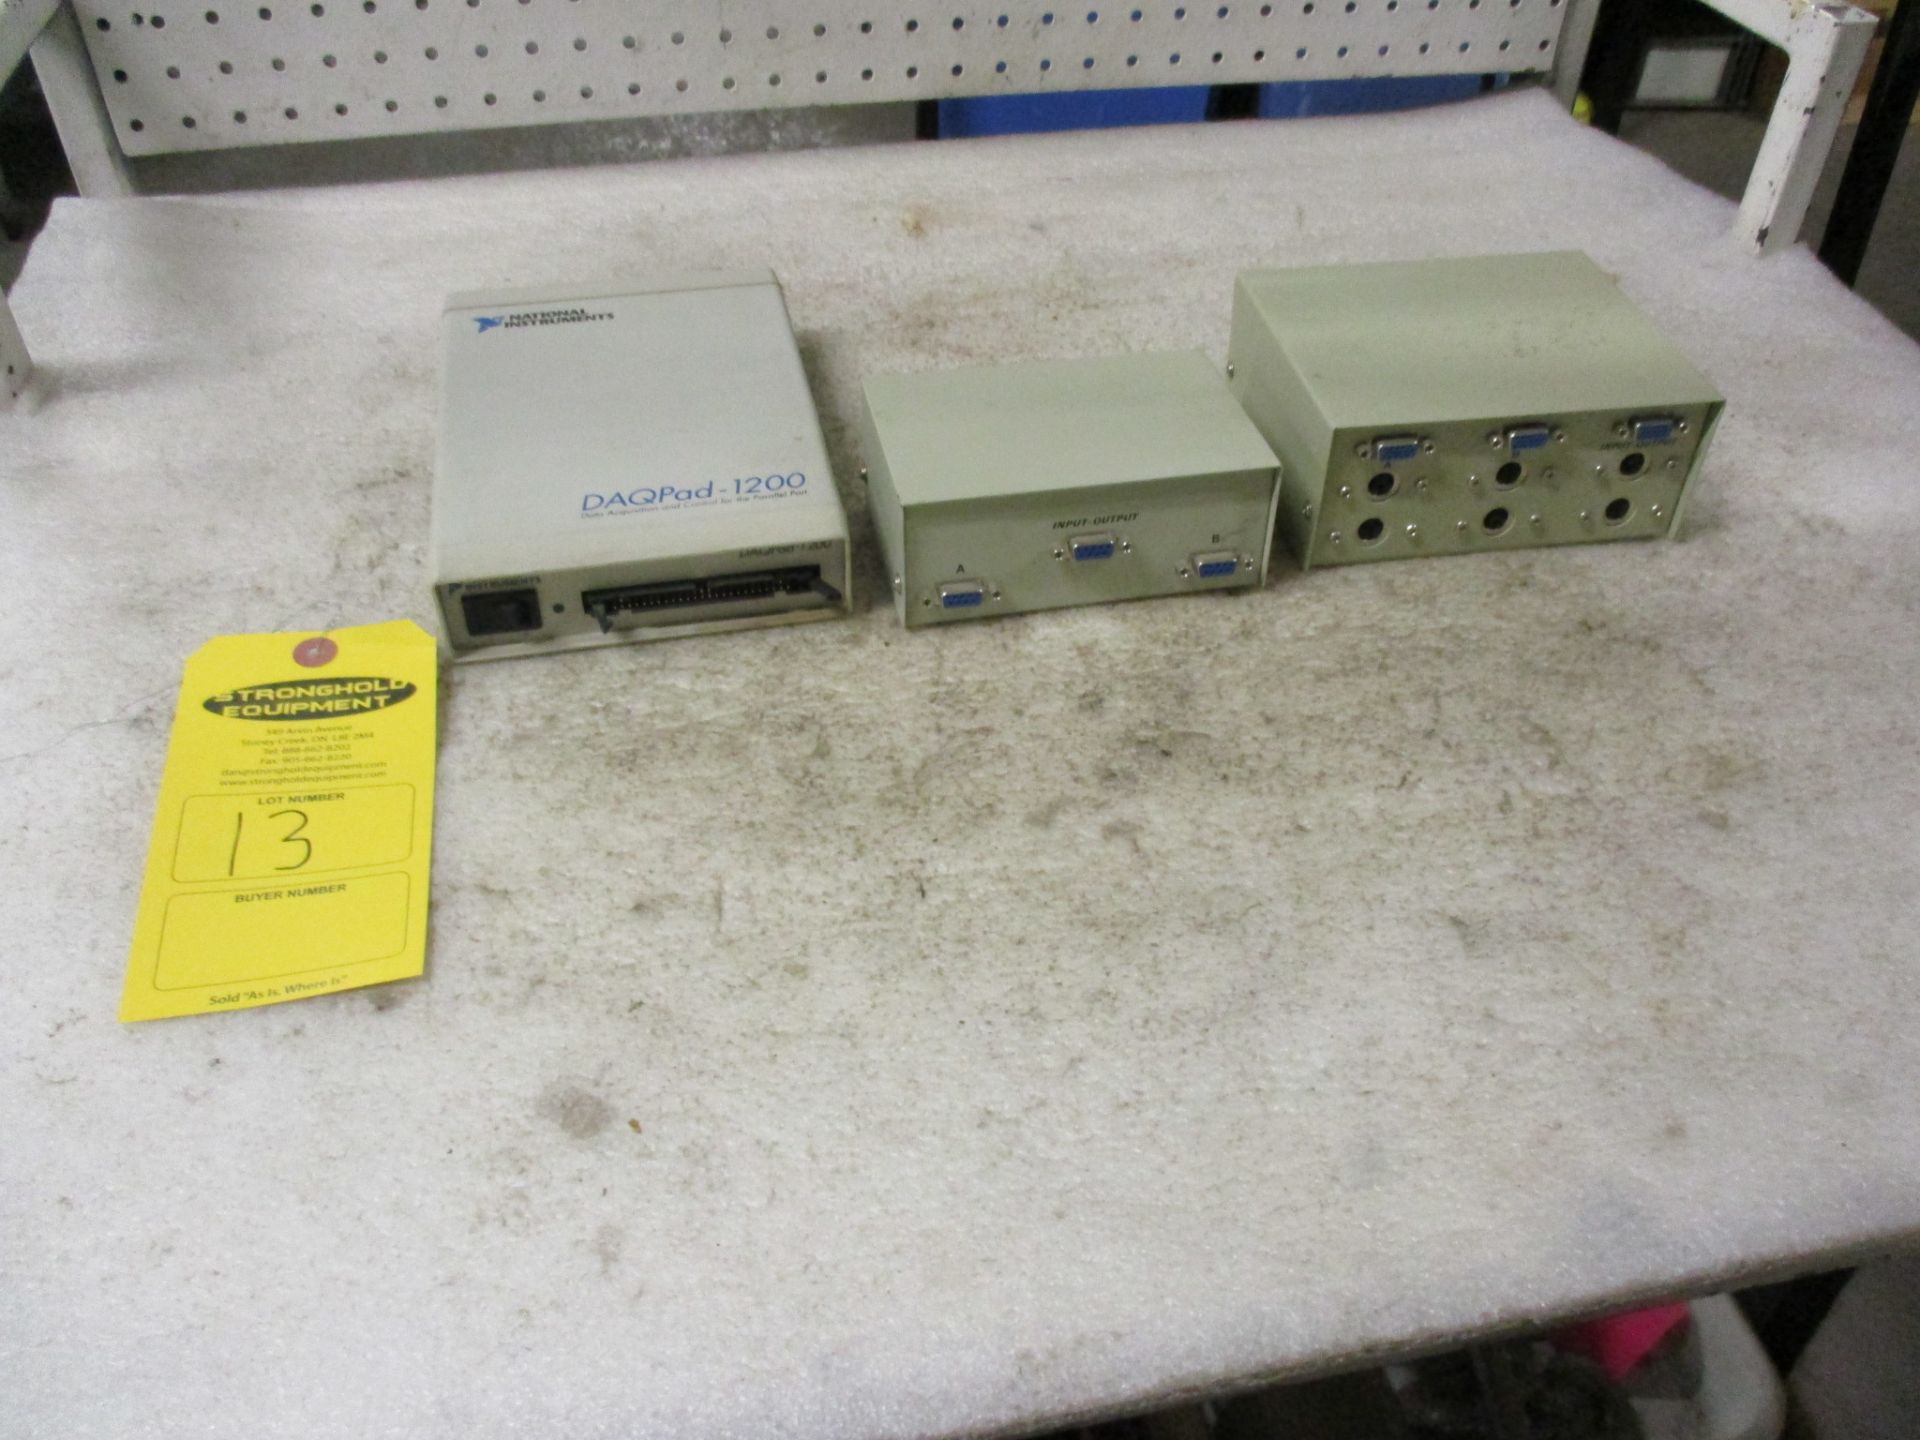 Lot of 3 Data Transfer switches - A to B ports - 1 x National DAQPad 1200